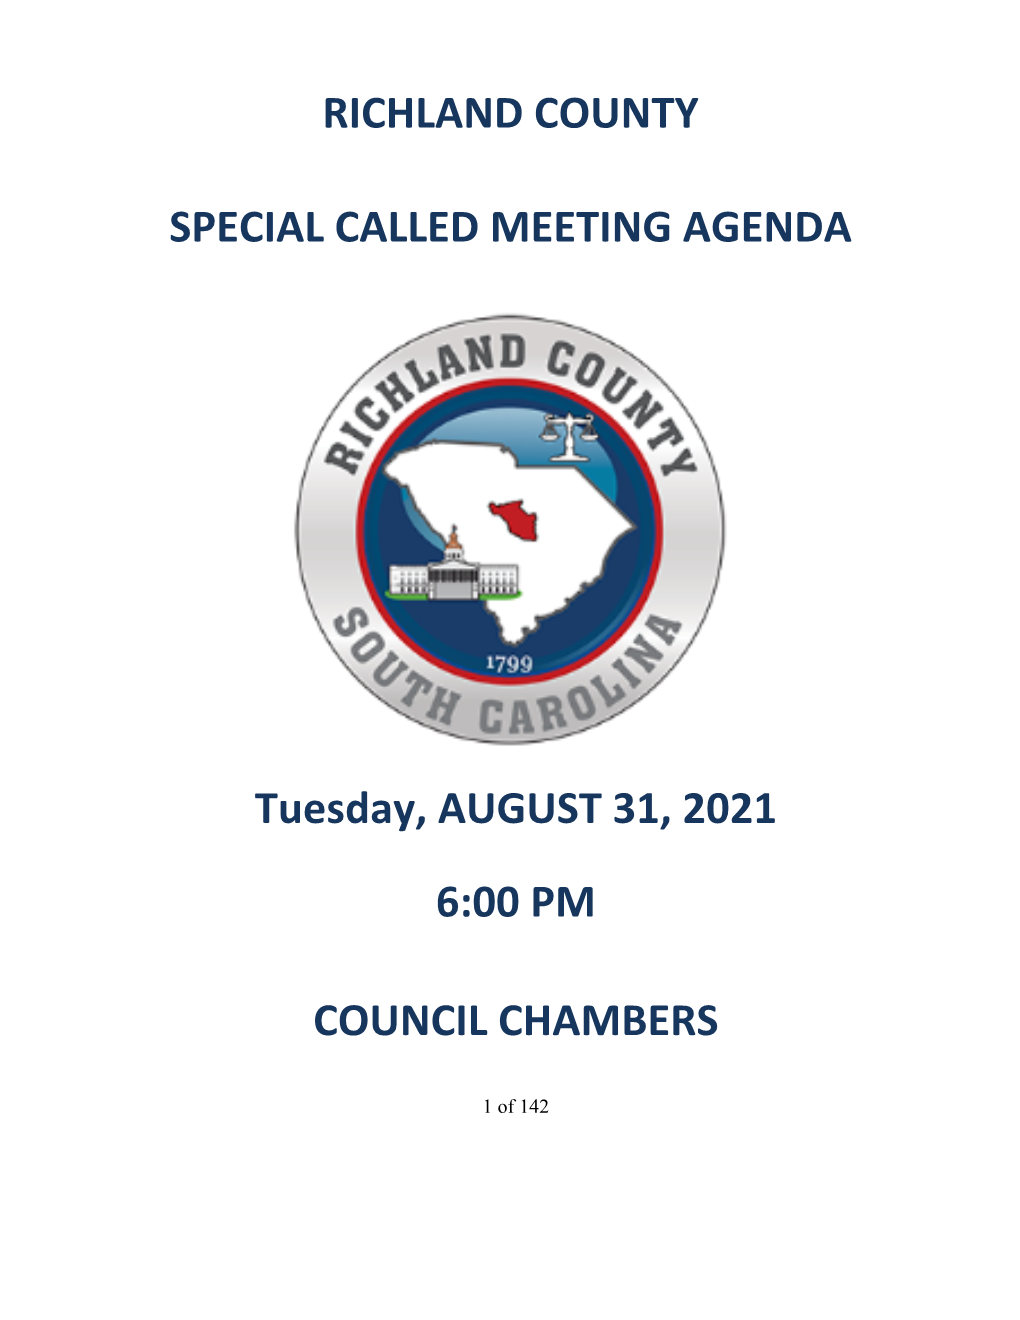 Richland County Special Called Meeting Agenda